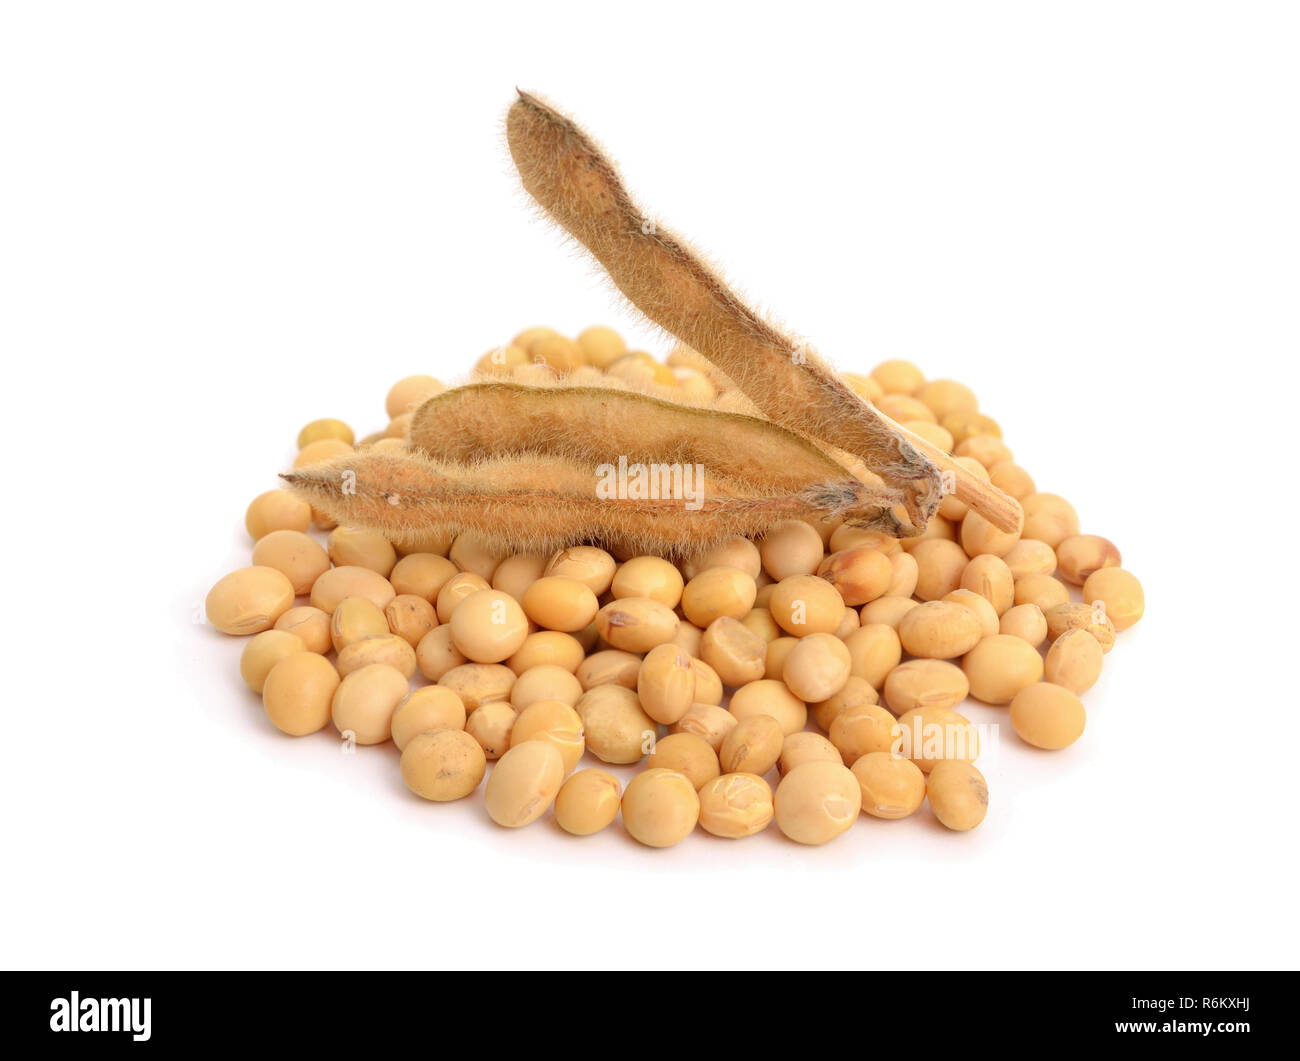 Dried Soy pods with seeds. Isplated on white background. Stock Photo